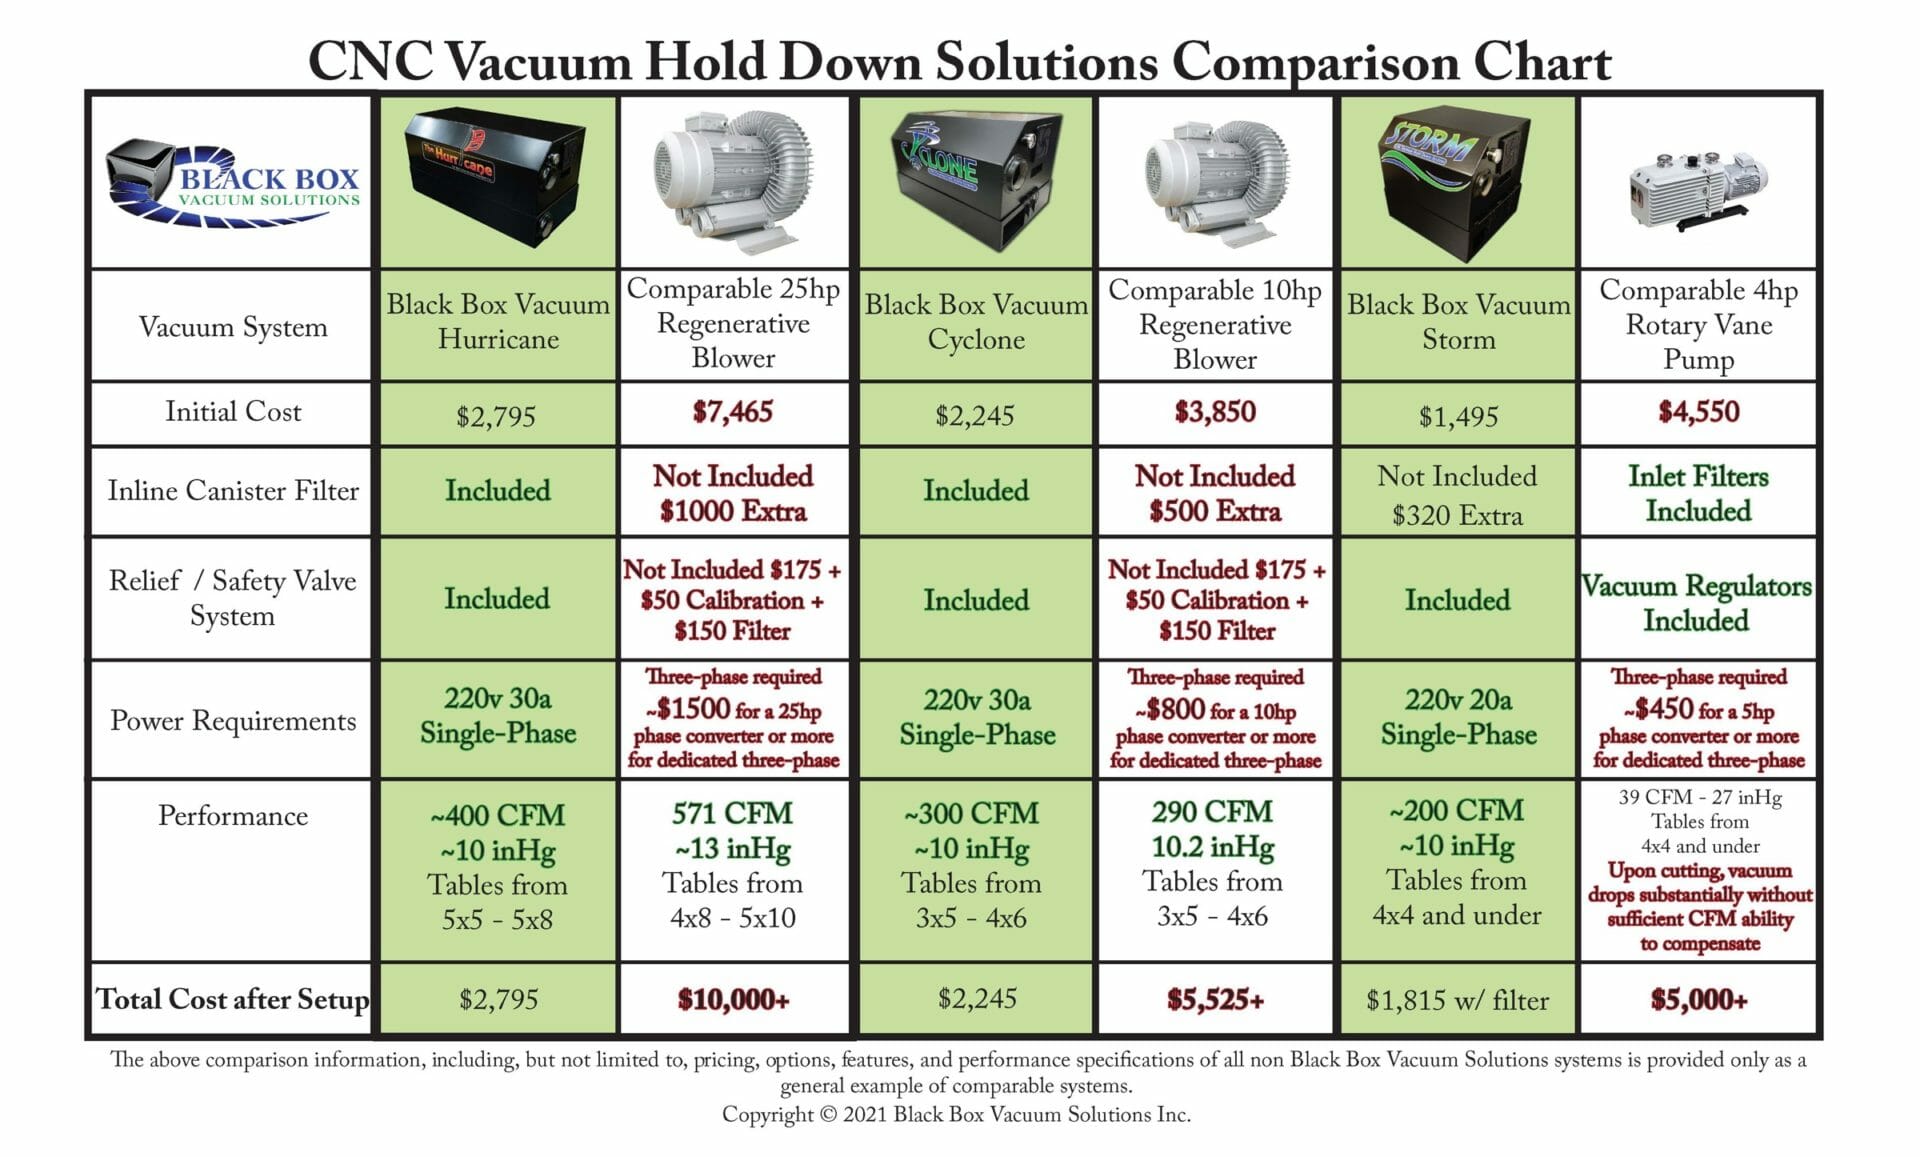 A chart comparing Black Box Vacuum Systems to regenerative blowers